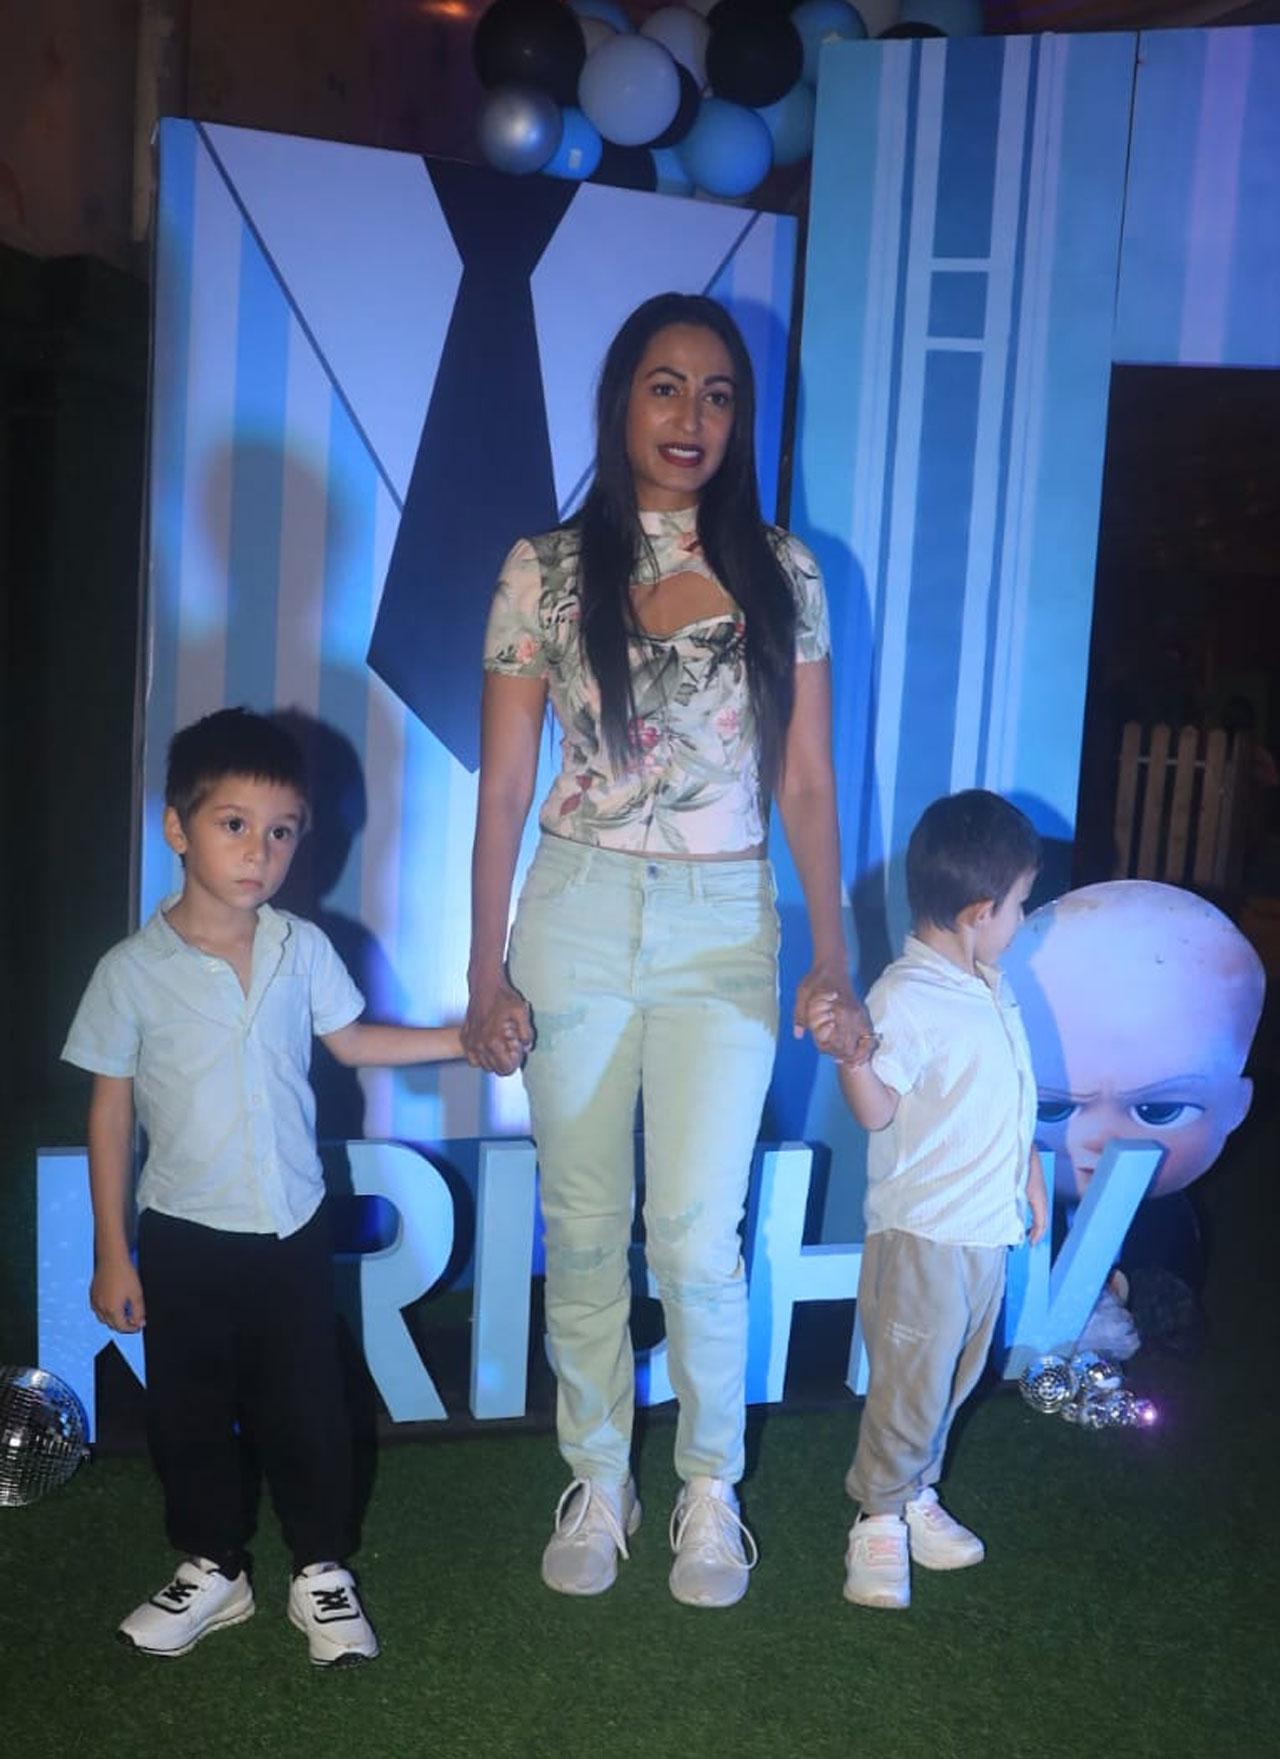 Actress Kashmera Shah looked happy and radiant as she graced the birthday bash with her children Rayaan and Krishaang. The expression on the toddlers' faces was way too adorable.